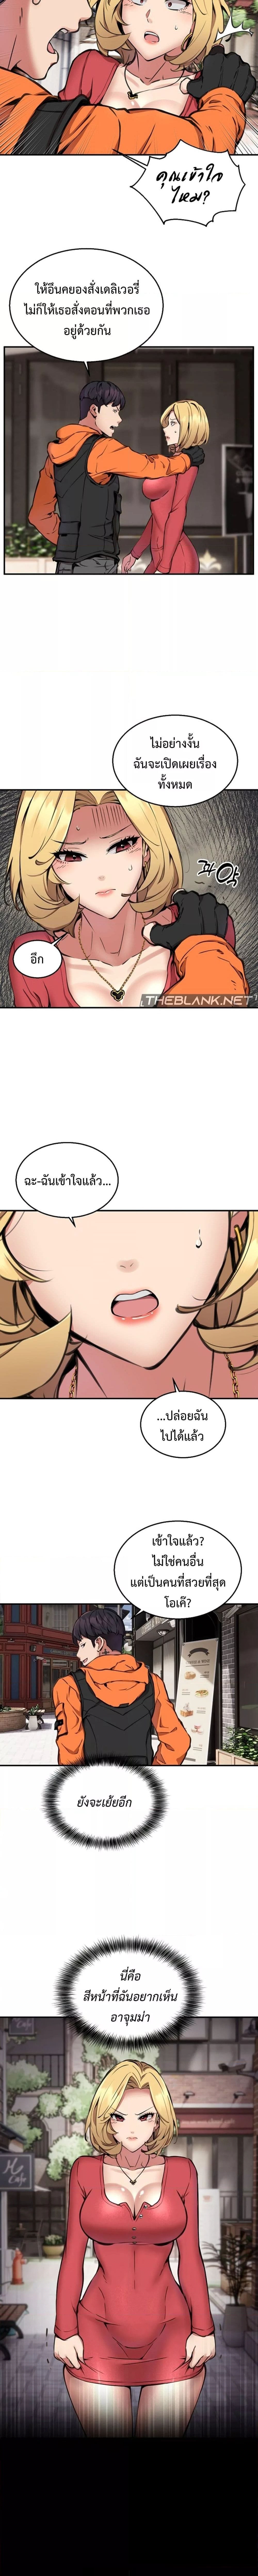 Driver in the New City ตอนที่ 8 ภาพ 7